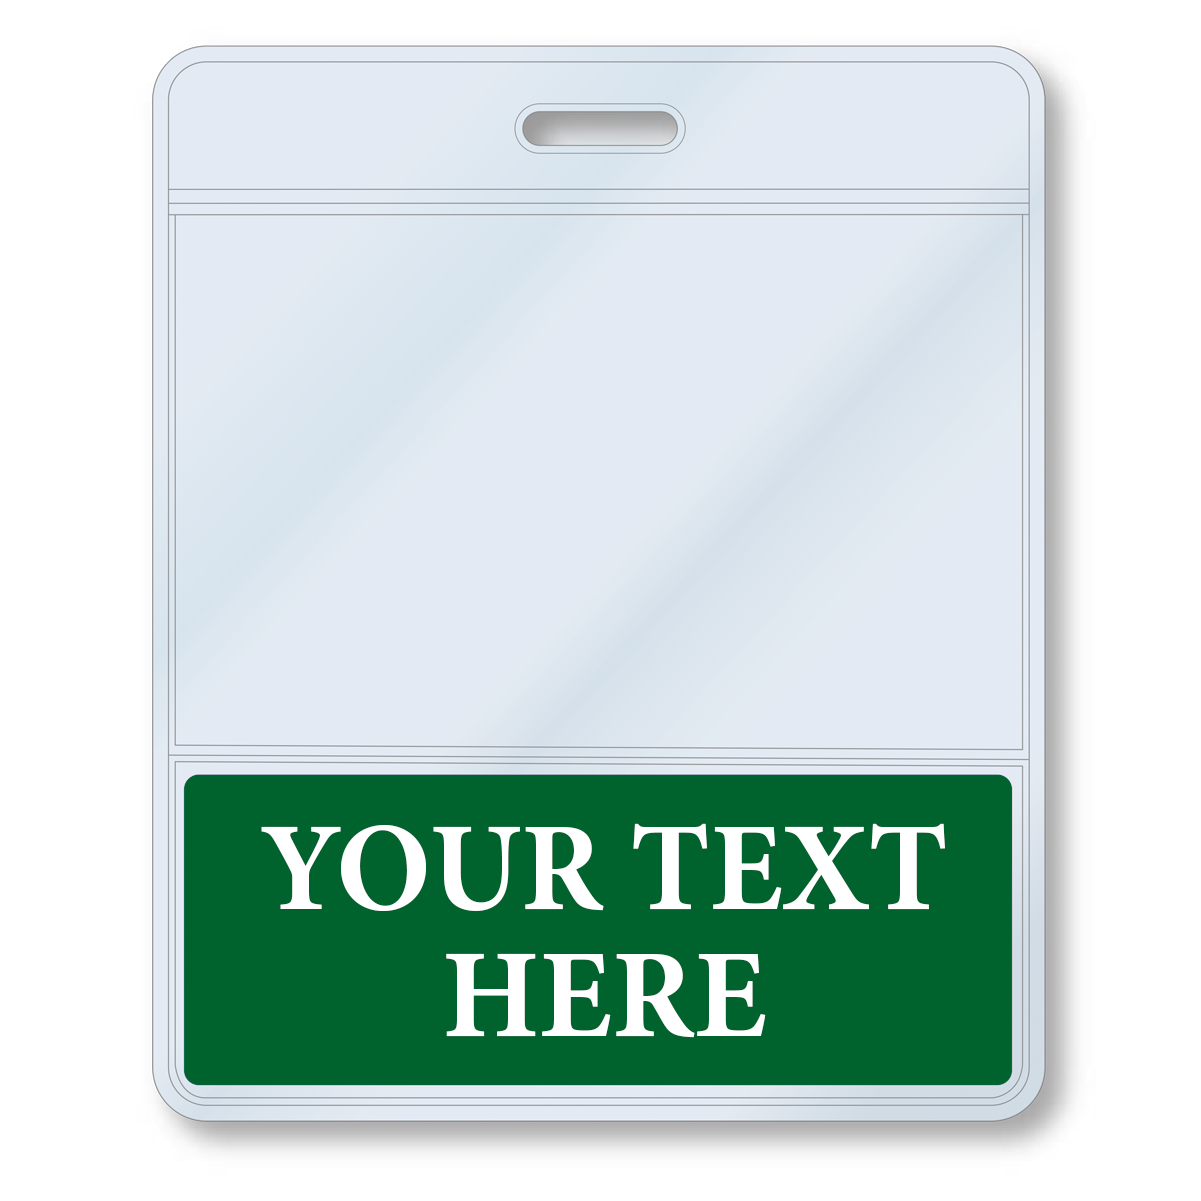 A Custom Printed BadgeBottoms® Horizontal (Badge Holder & Badge Buddy IN ONE) with a slot at the top for a clip, featuring a green section at the bottom containing the customizable title "YOUR TEXT HERE" in white letters.